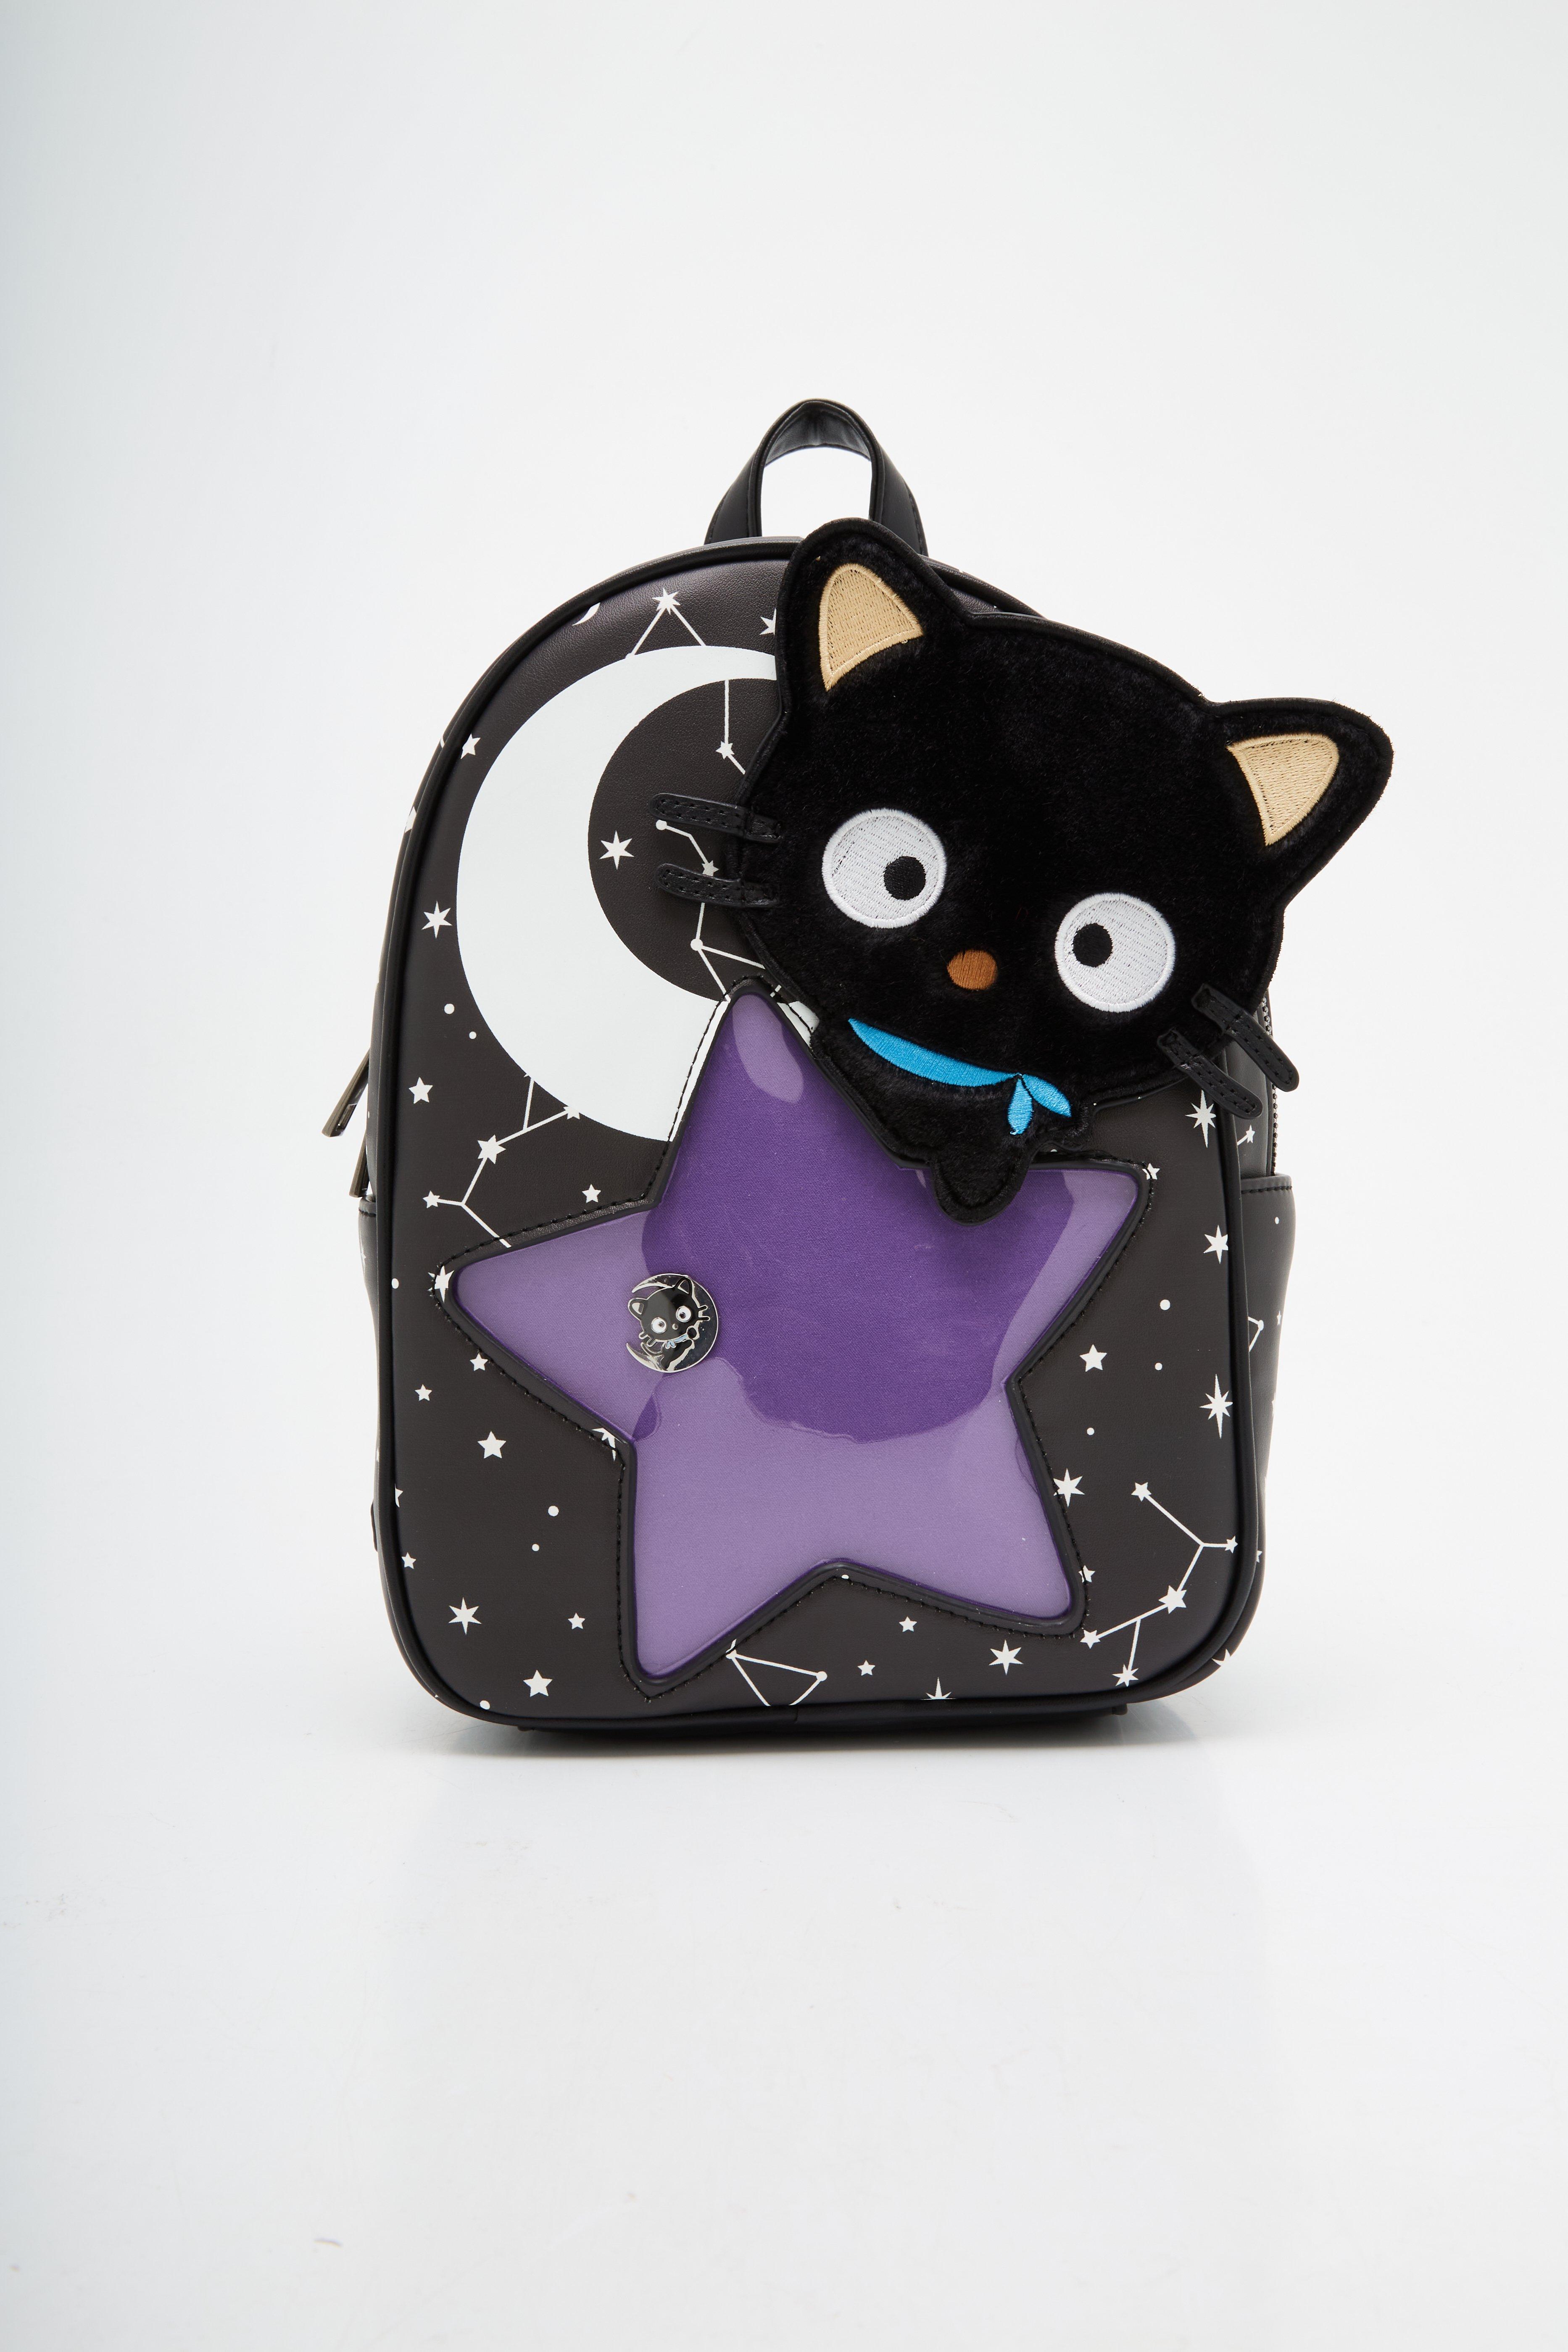 Cat Who Invented Bebop, The – The Creative Company Shop